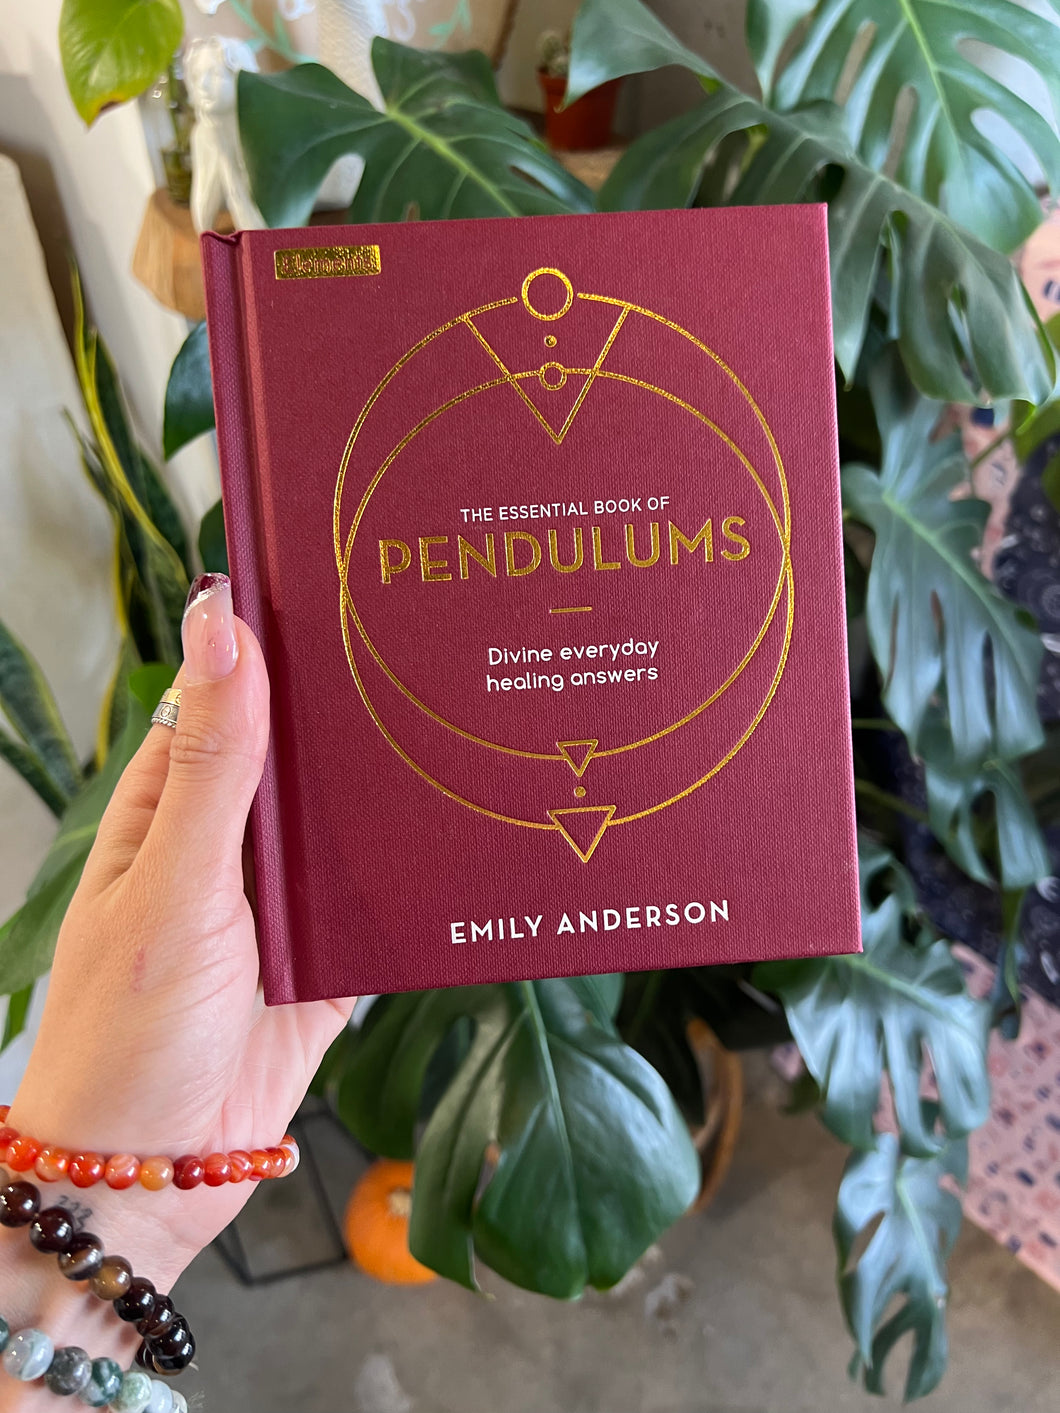 The Essential Book of Pendulums: Divine Everyday Healing Answers